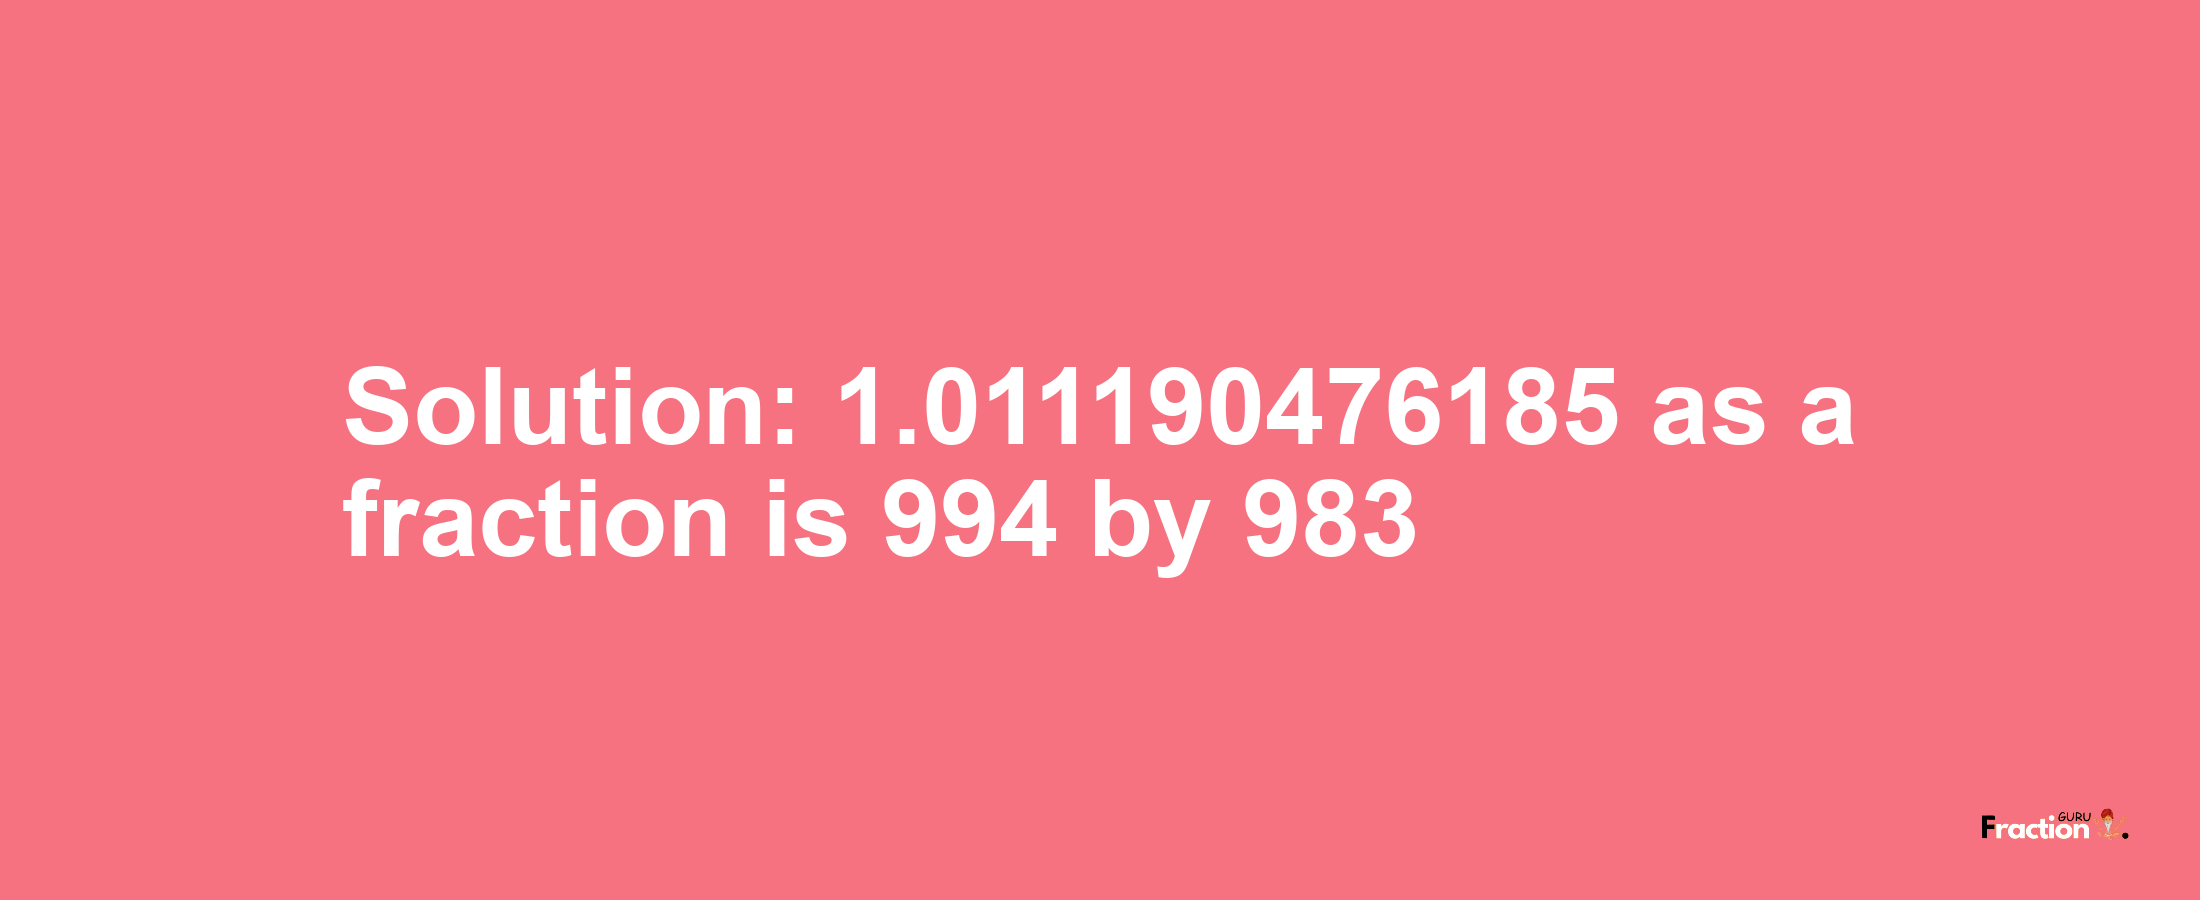 Solution:1.011190476185 as a fraction is 994/983